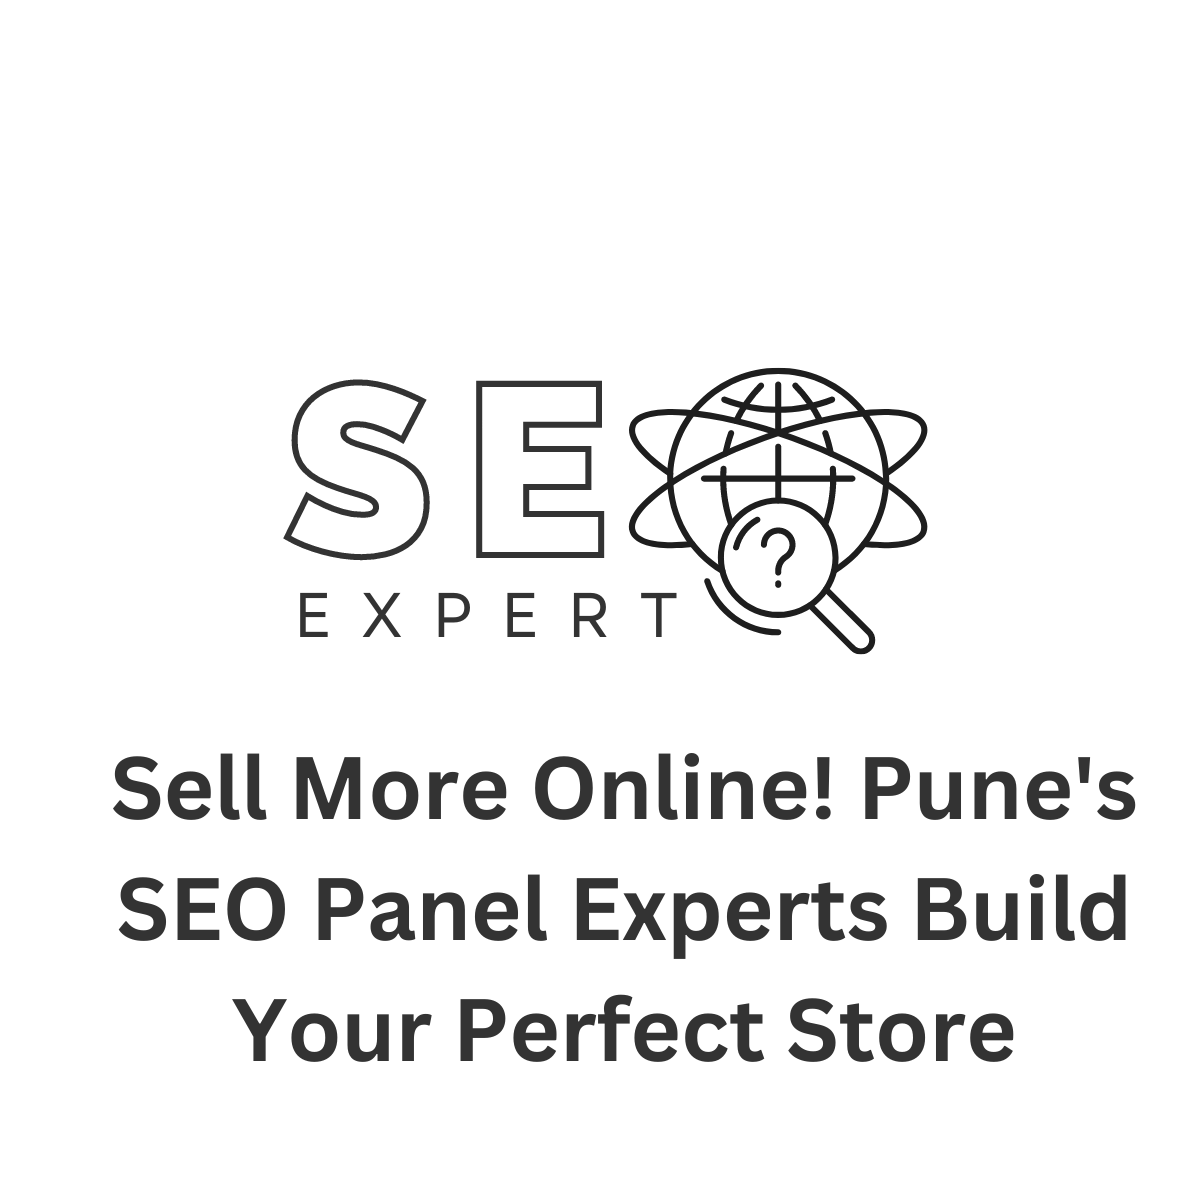 Sell More Online! Pune's SEO Panel Experts Build Your Perfect Store